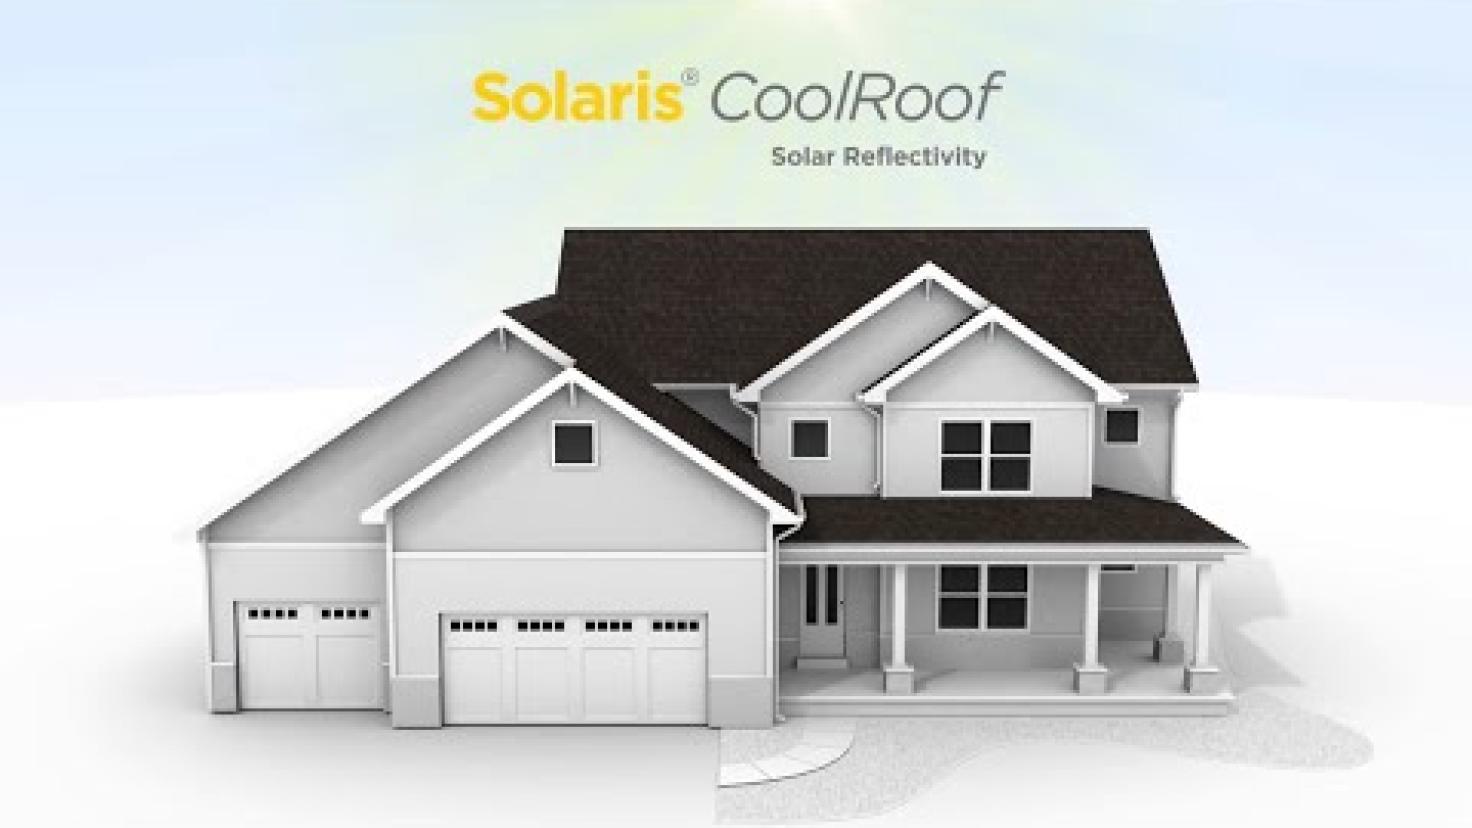 CertainTeed Solaris® Cool Roof for Solar Reflectivity